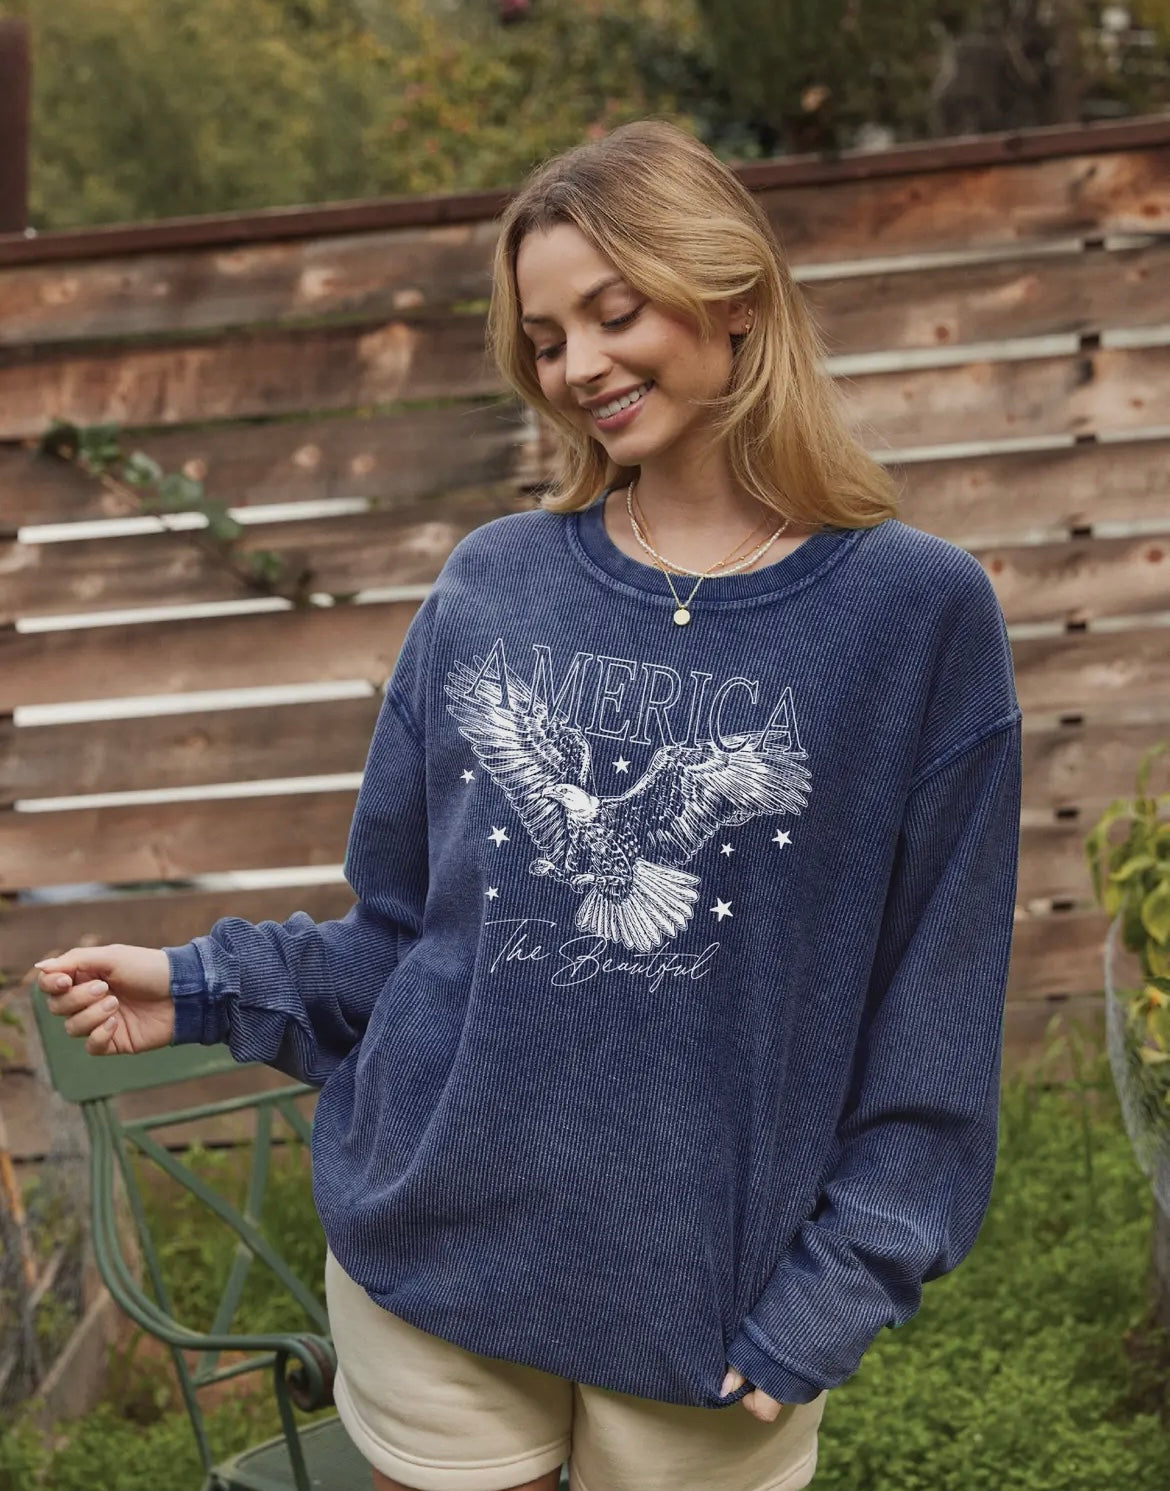 America the Beautiful Thermal Vintage Pullover by Oat Collective